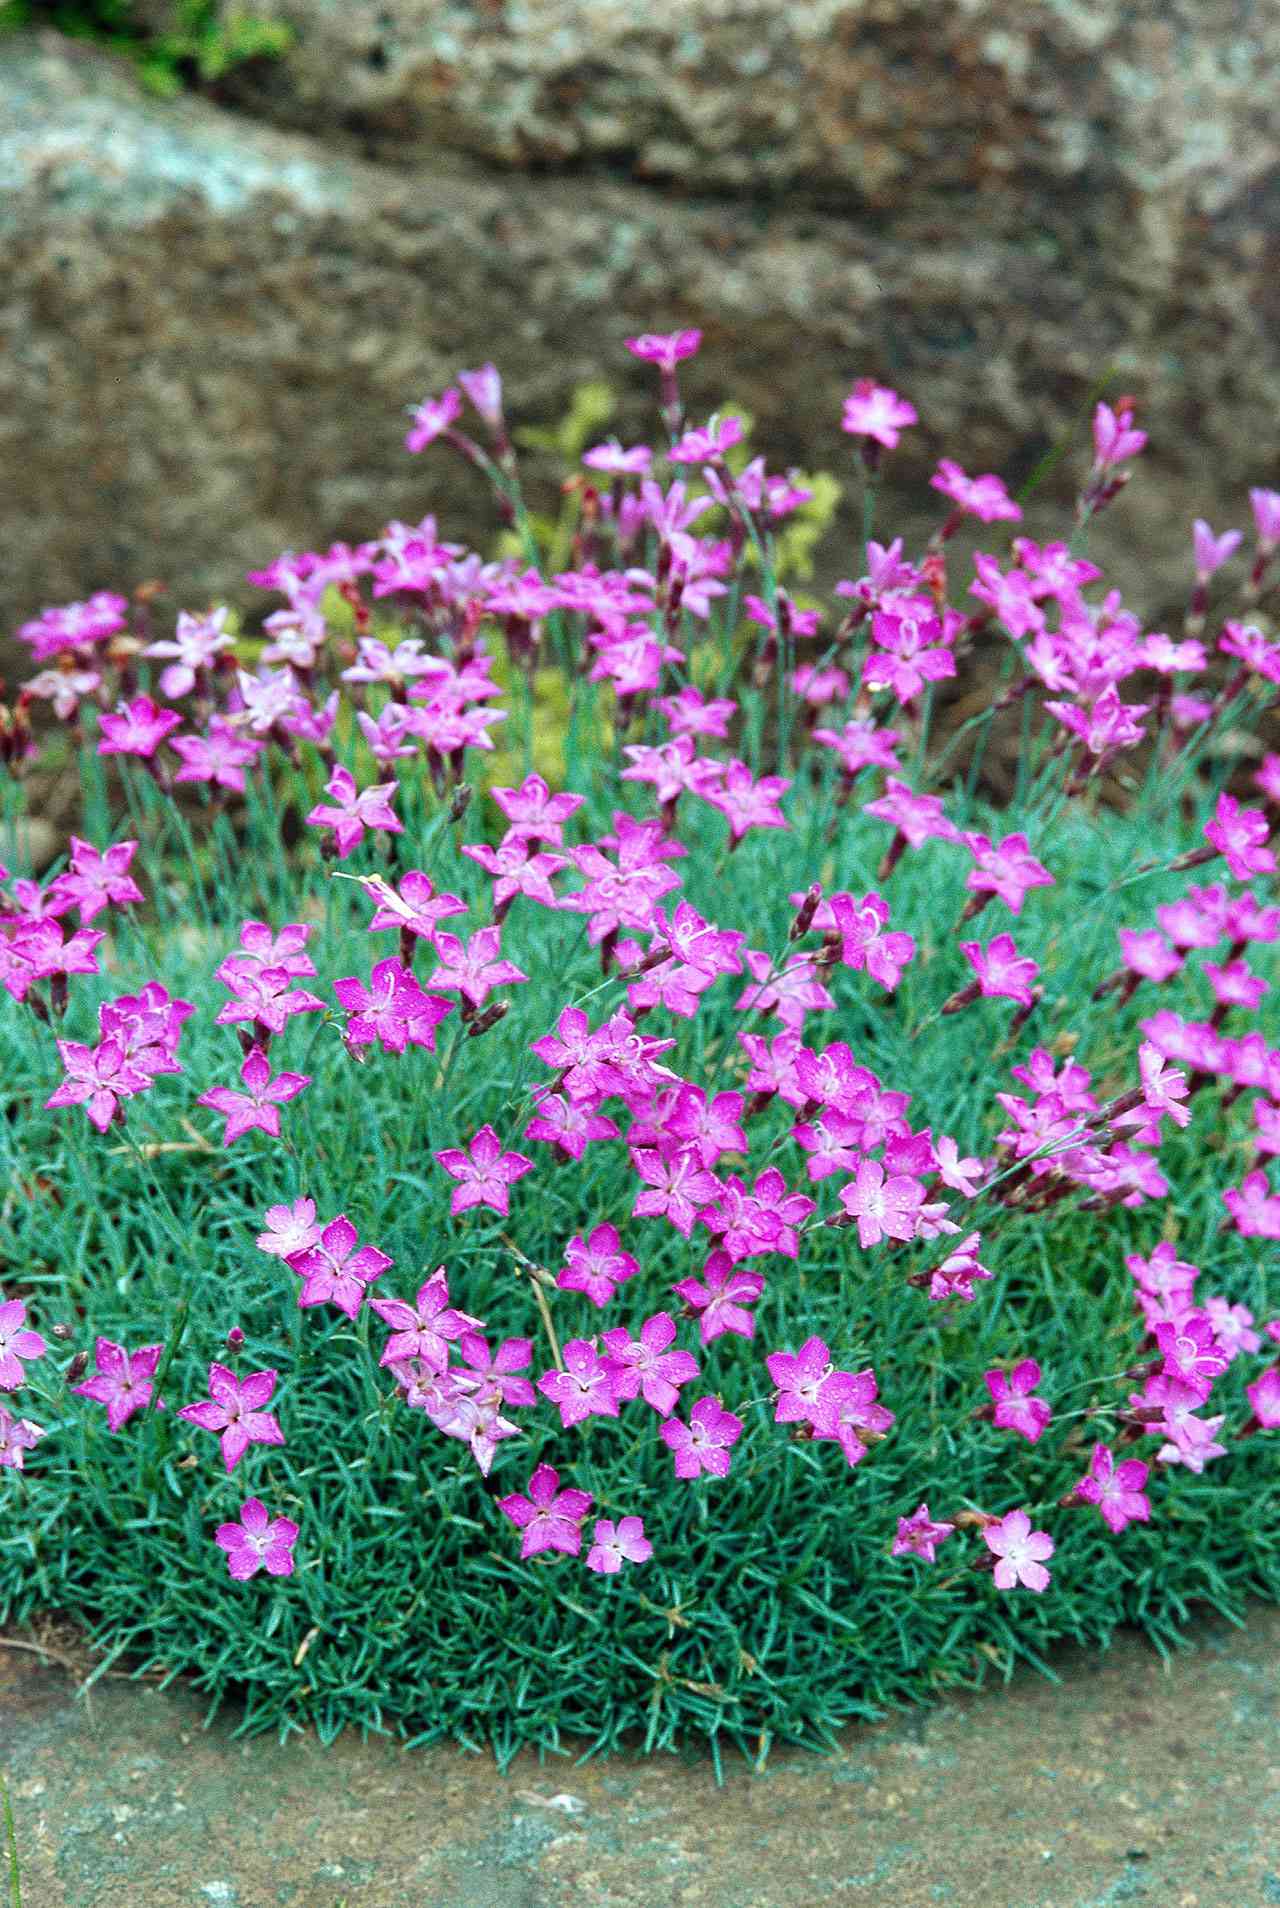 Drought Tolerant Groundcovers Better, Trailing Ground Cover Plants